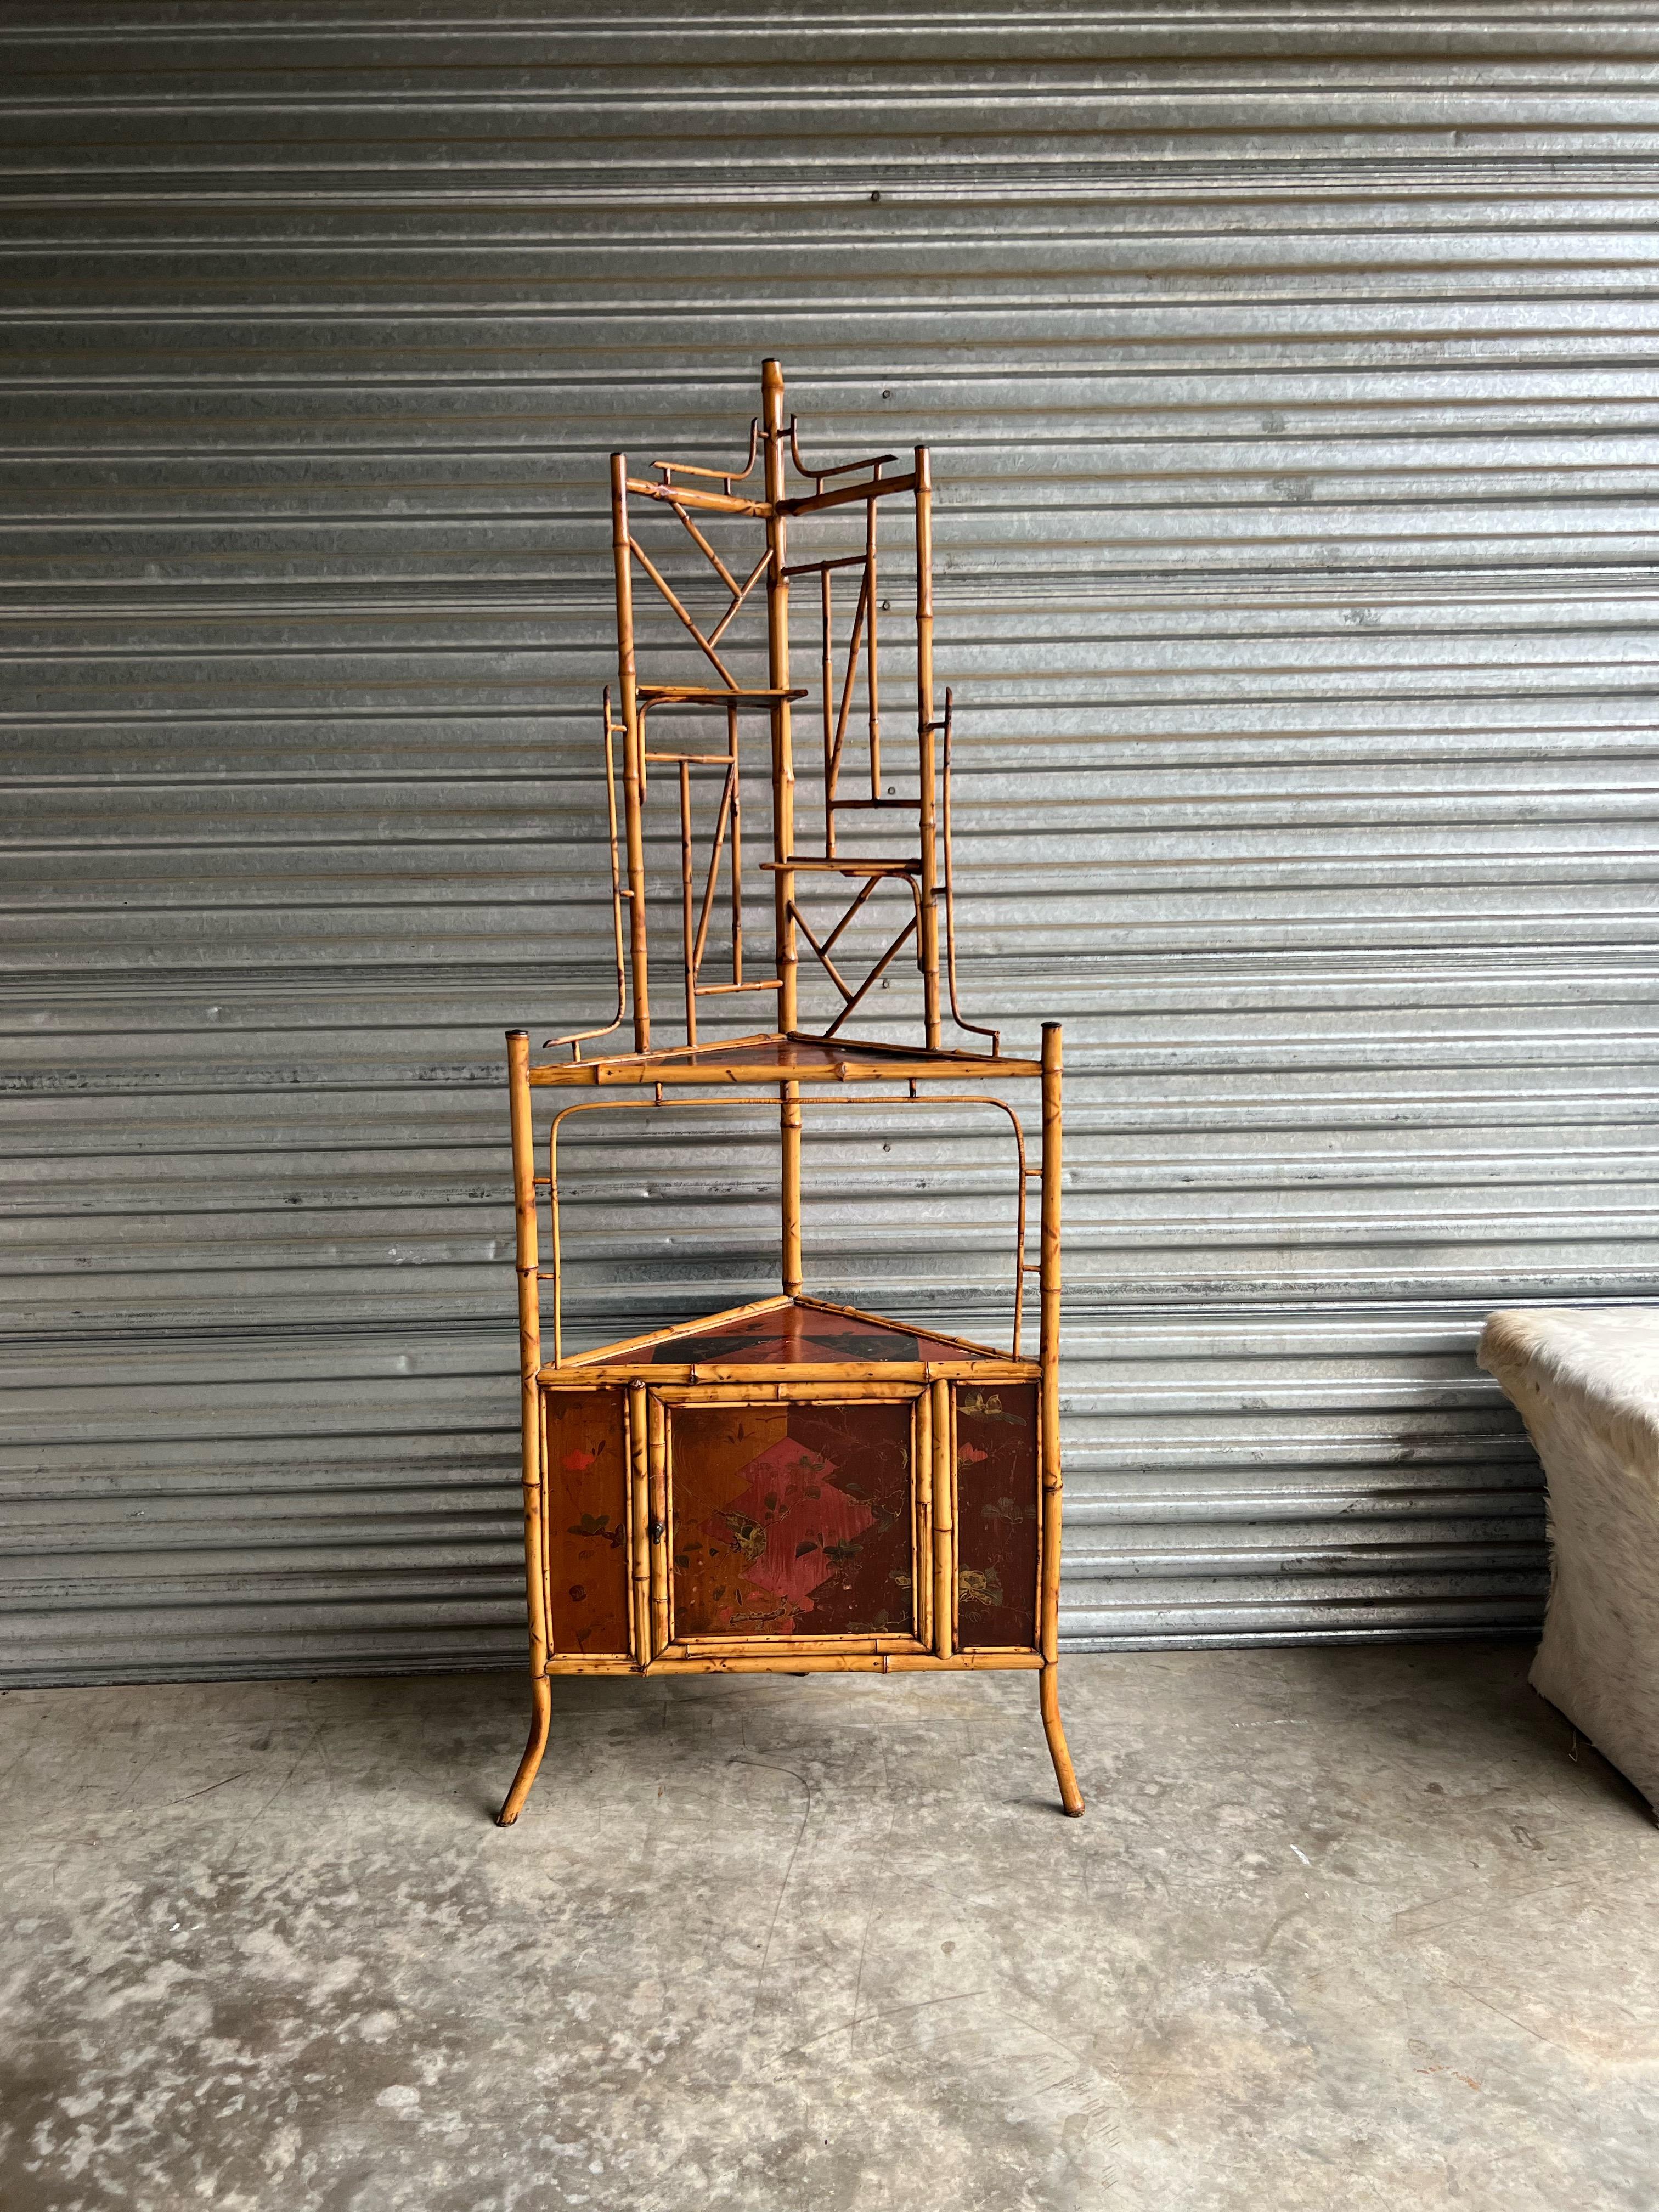 This is a late 19th century English bamboo corner cabinet. Its style is representative of the Aesthetic Movement that was in fashion during this era. The lacquered panels are russet and black and have leaves and other natural elements painted on